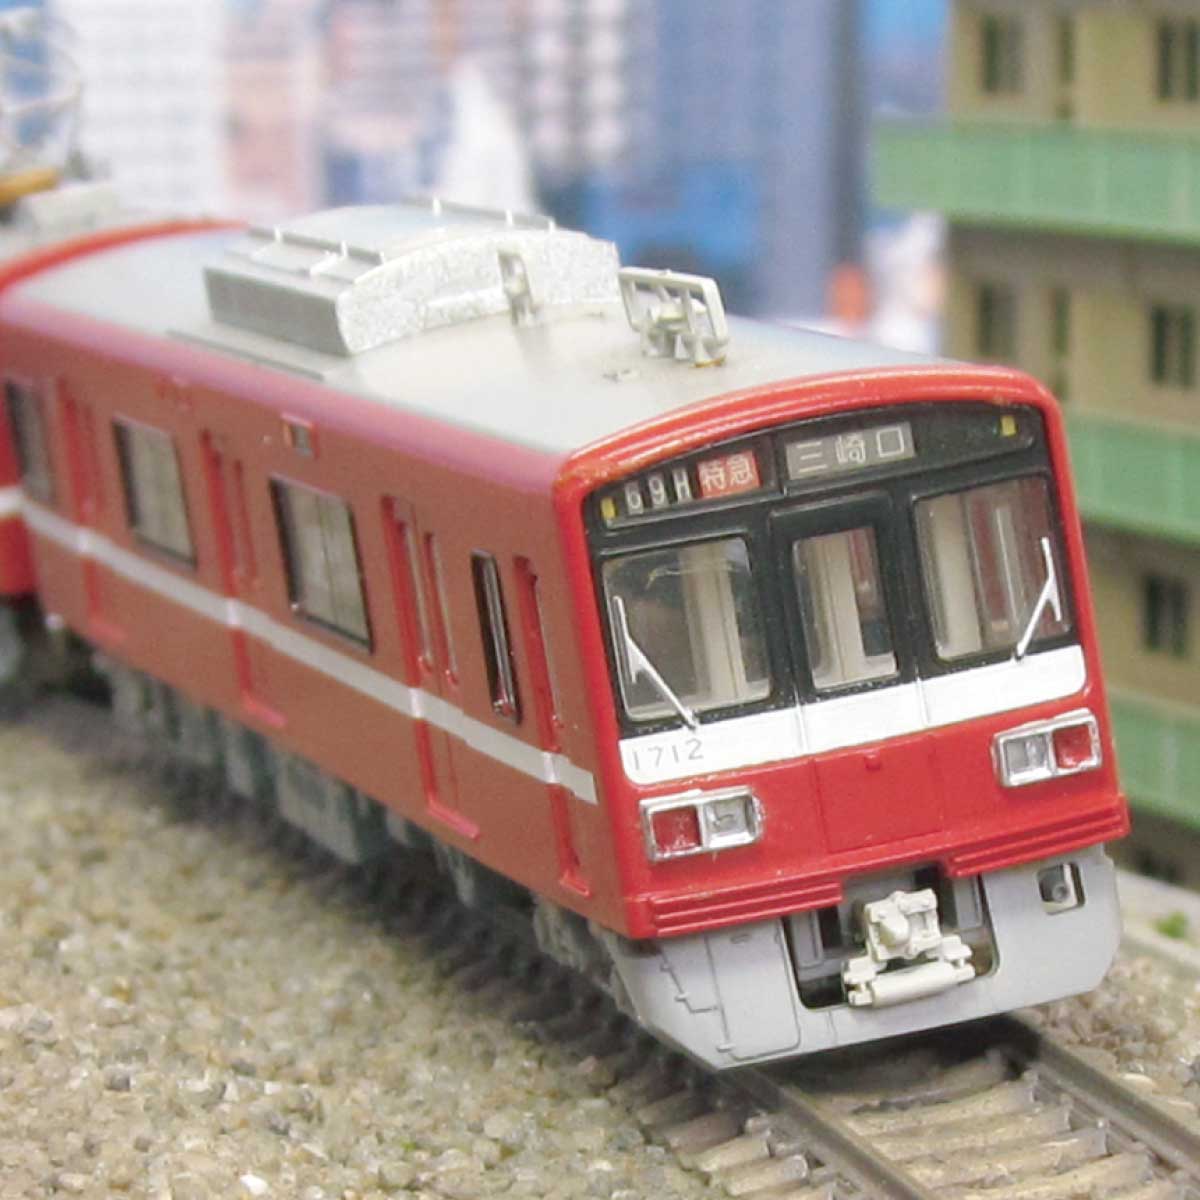 444A＞京急1500形（未更新車）4両編成セット｜エコノミーキット｜N